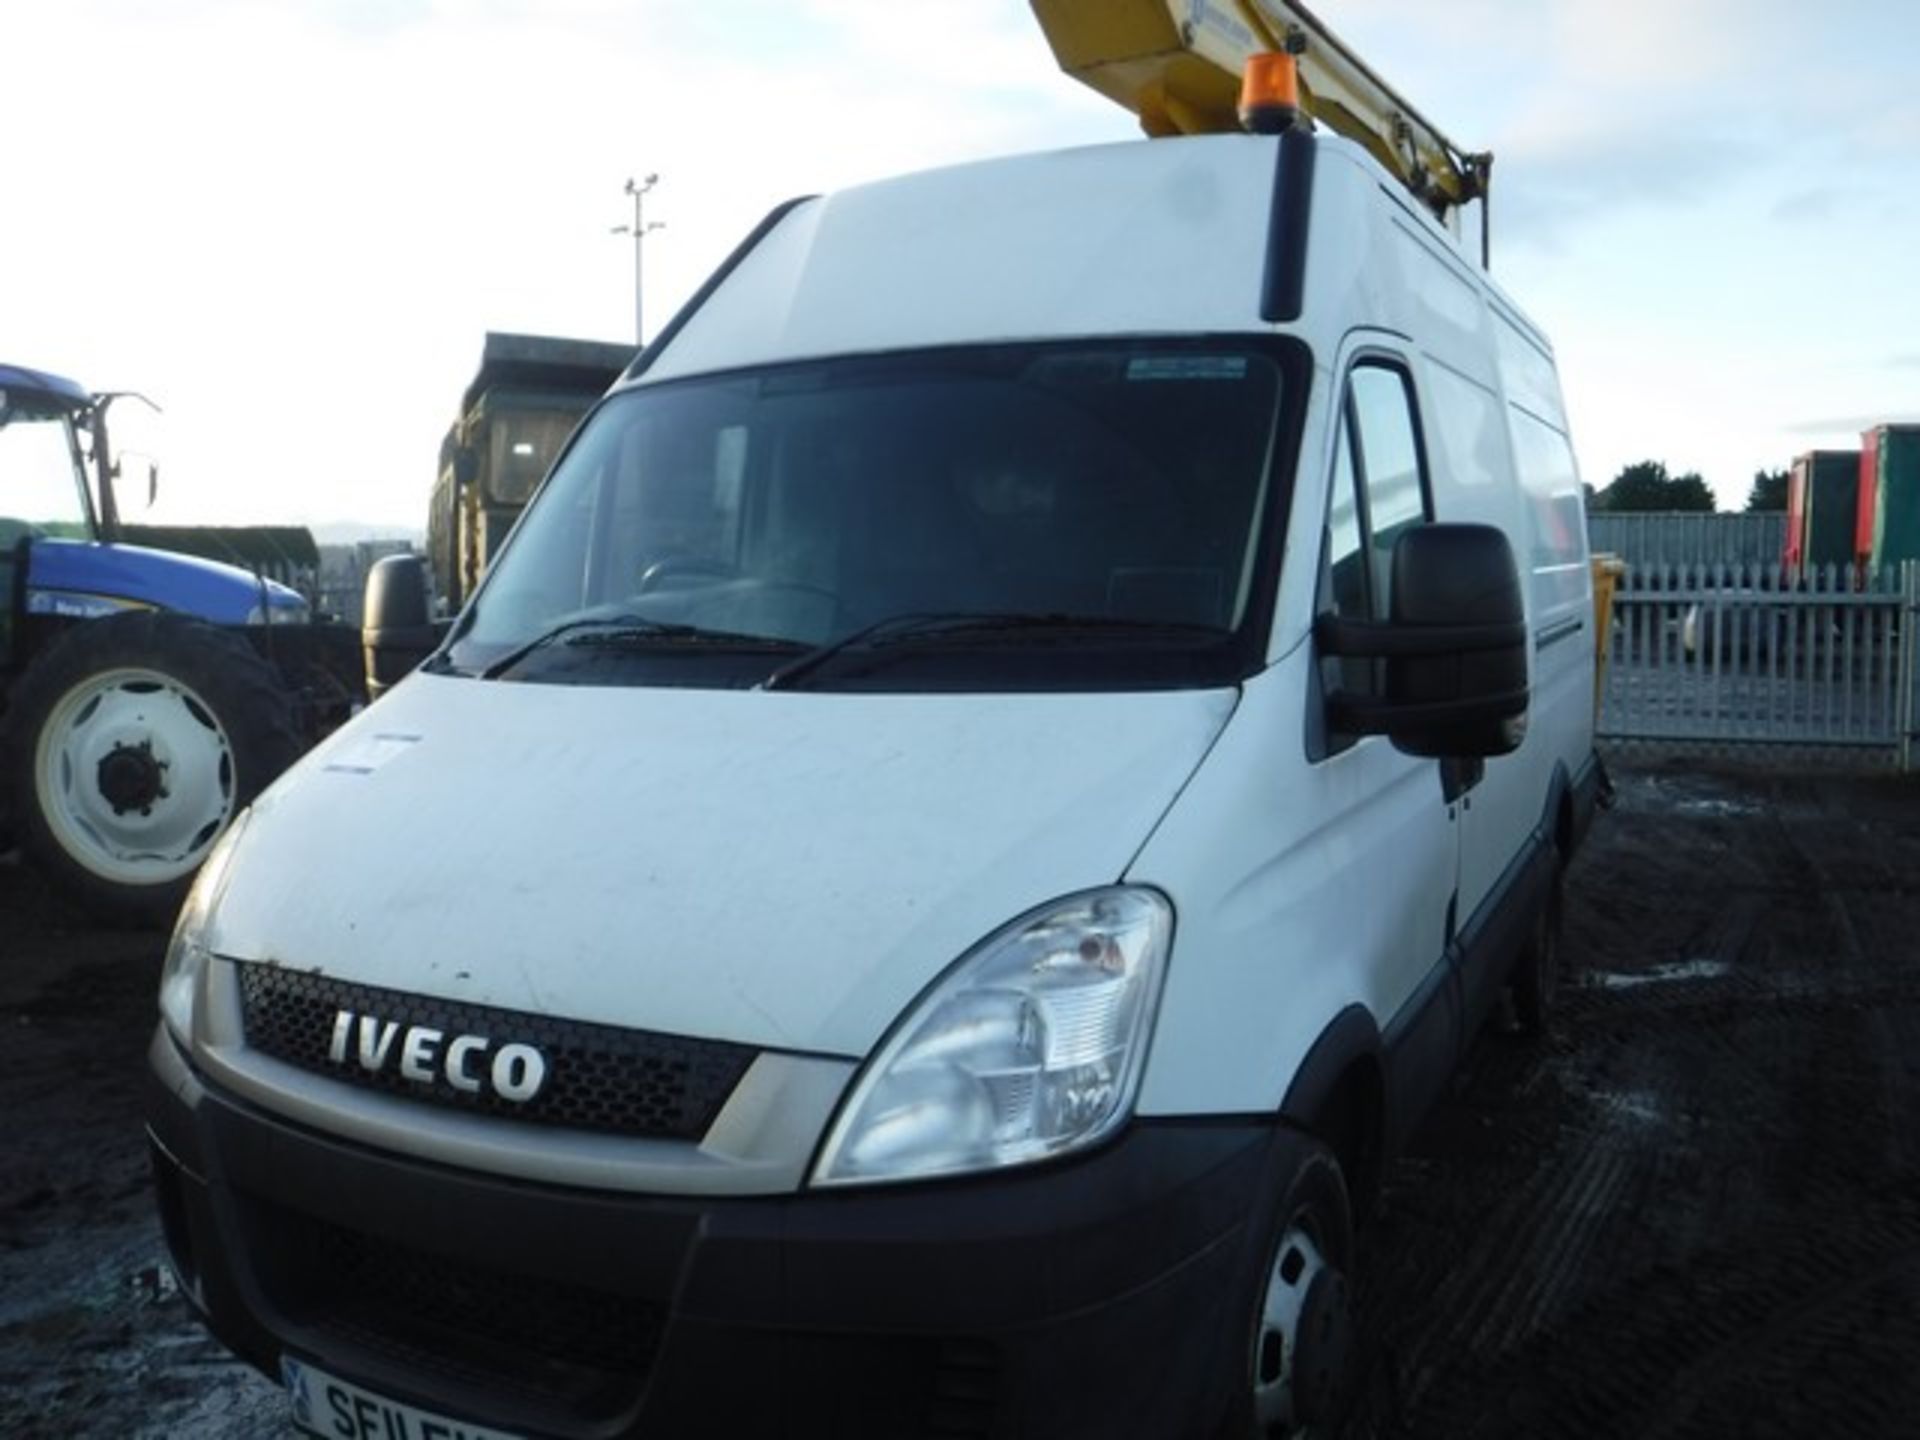 IVECO DAILY 50C15 - 2998cc - Image 5 of 17